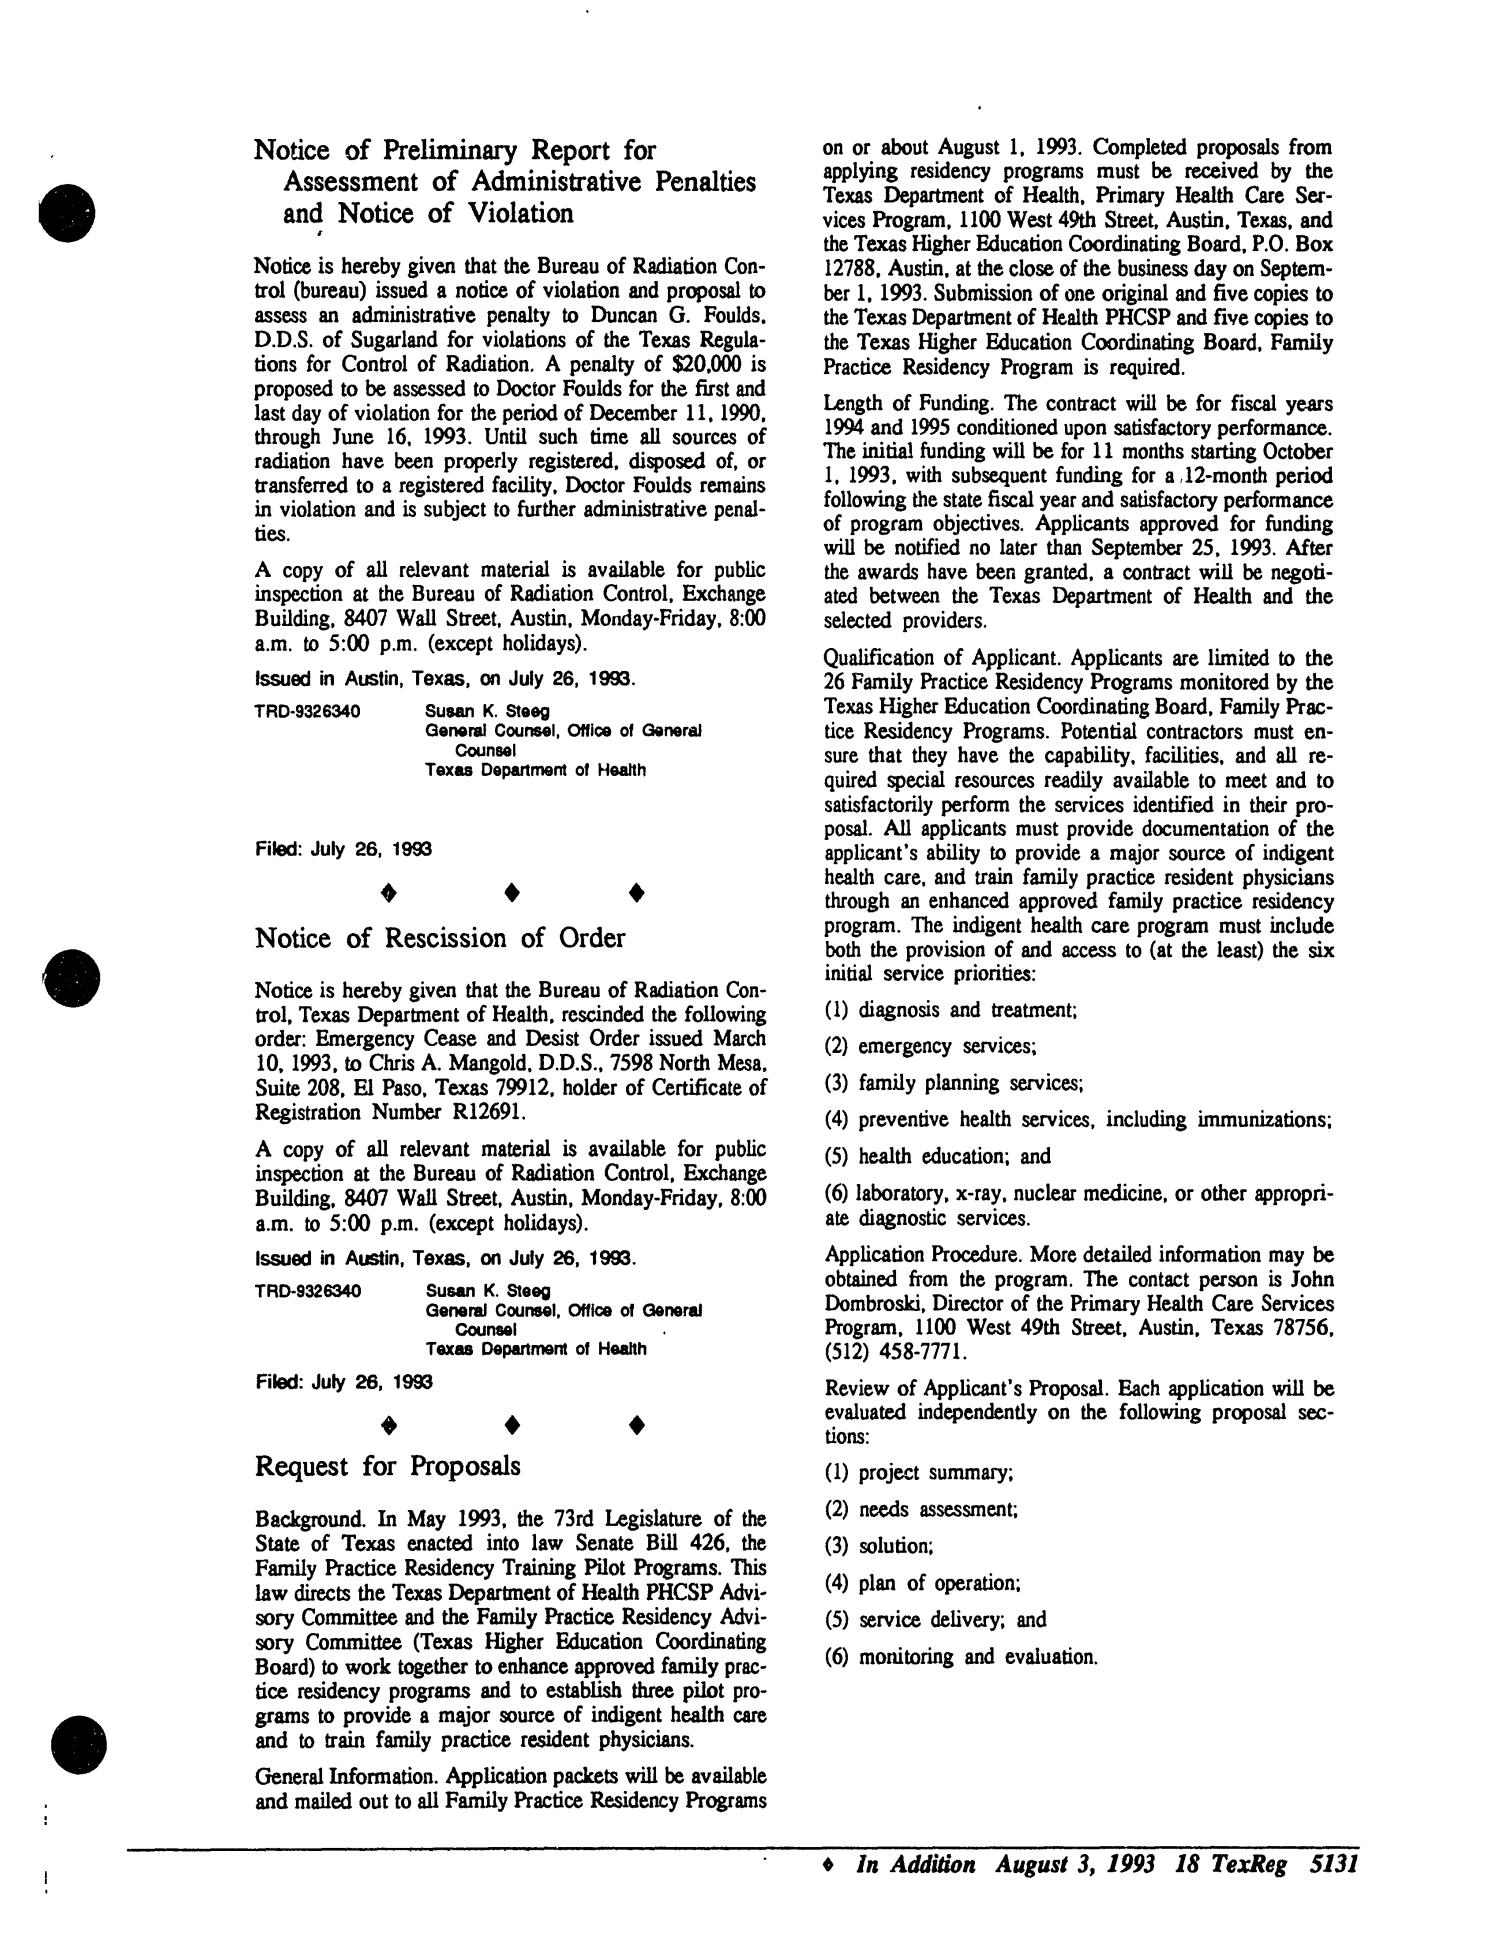 Texas Register, Volume 18, Number 58, Part II, Pages 5077-5155, August 3, 1993
                                                
                                                    5131
                                                